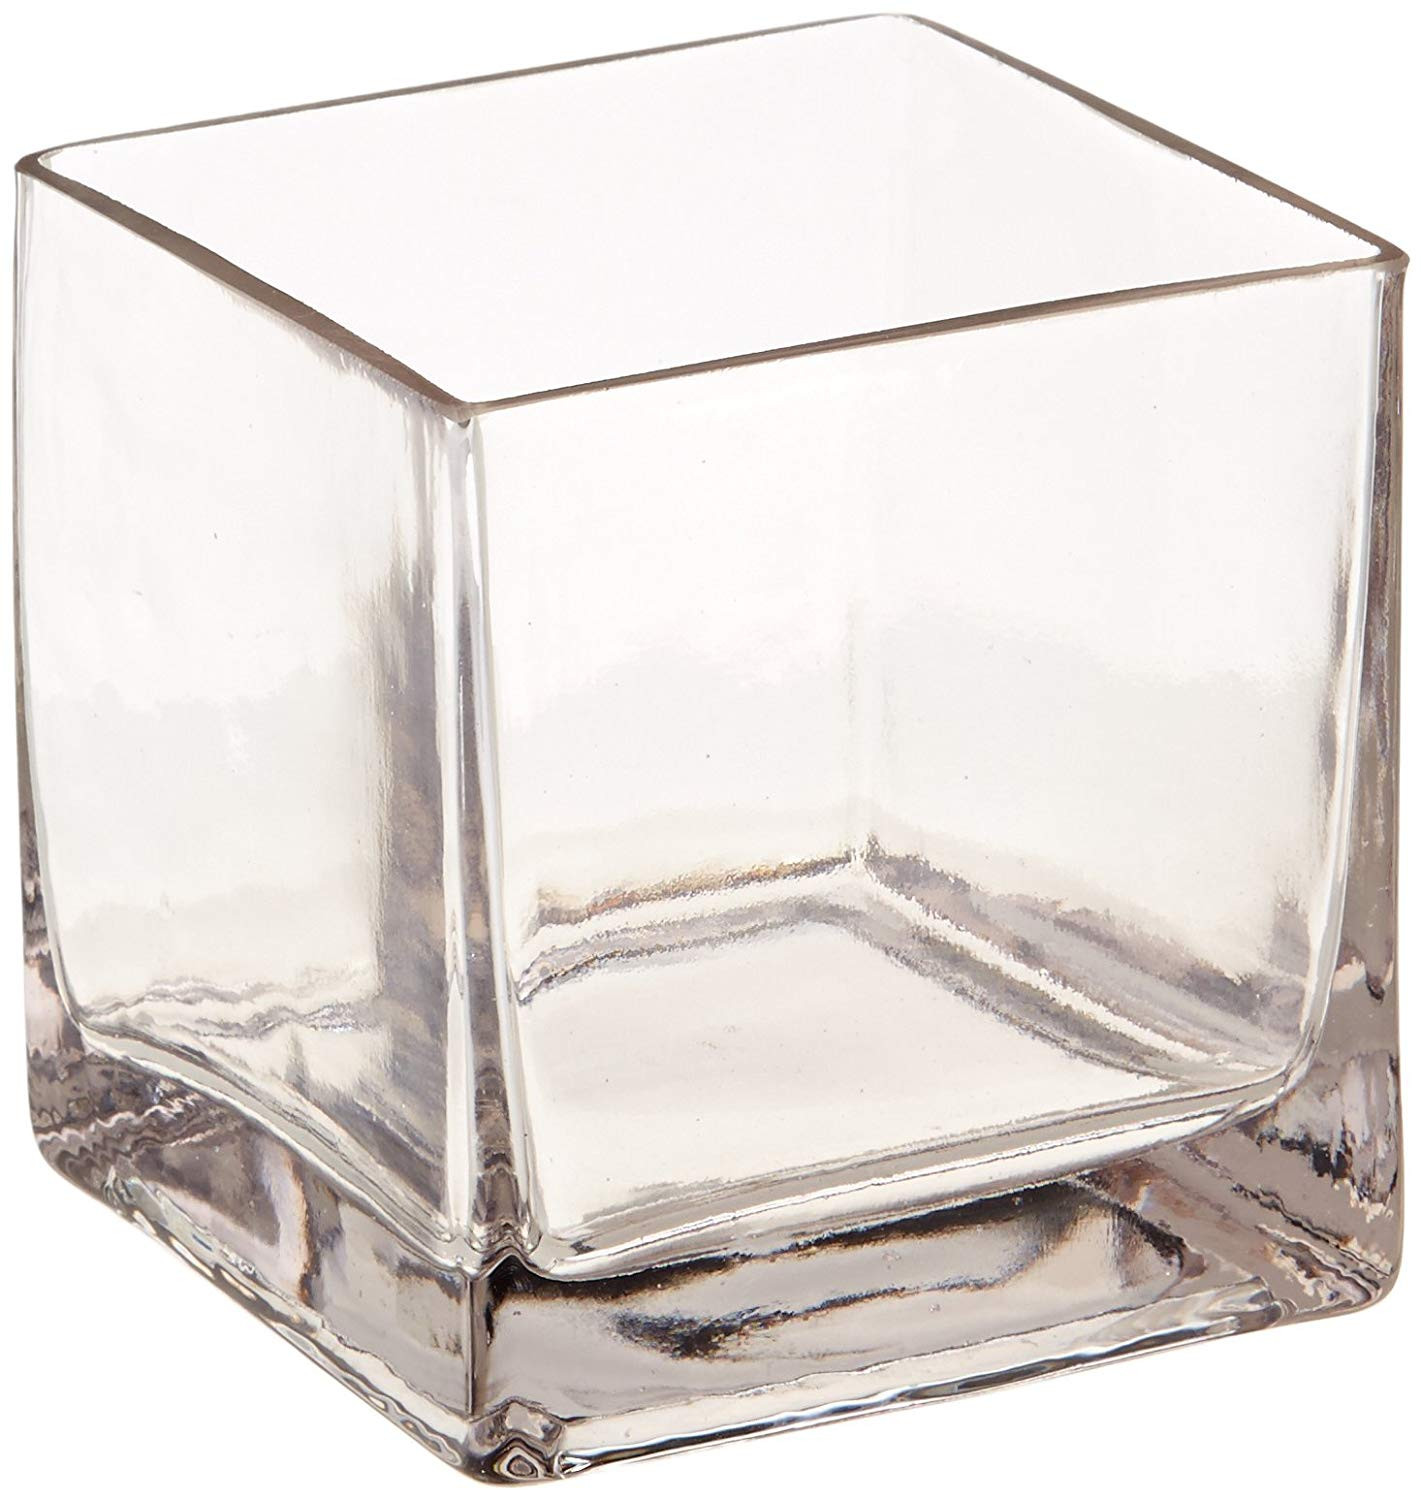 19 Stunning 8 Square Glass Vase 2024 free download 8 square glass vase of amazon com 12piece 4 square crystal clear glass vase home kitchen with regard to 71 jezfmvnl sl1500